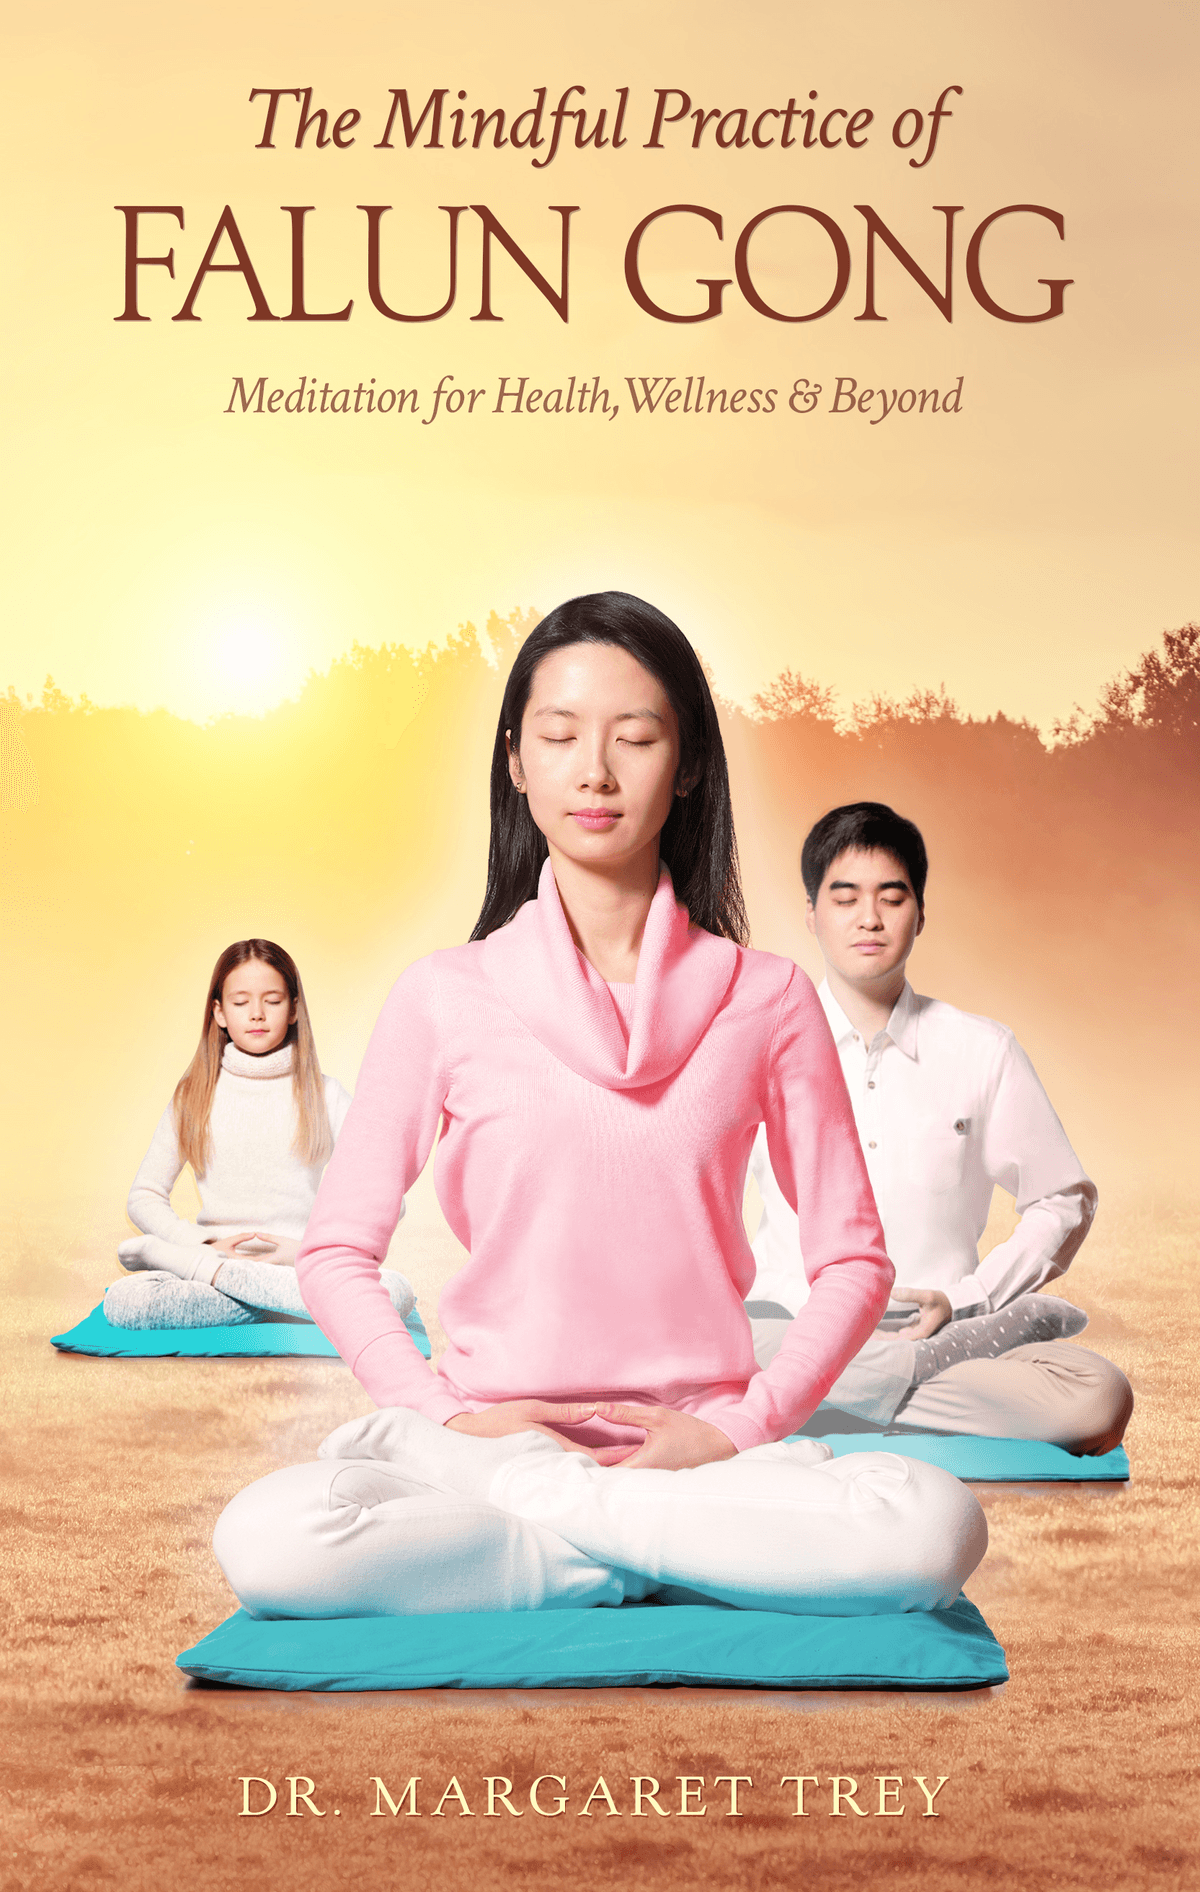 A new book looks at what science has to say about the health effects of Falun Gong.